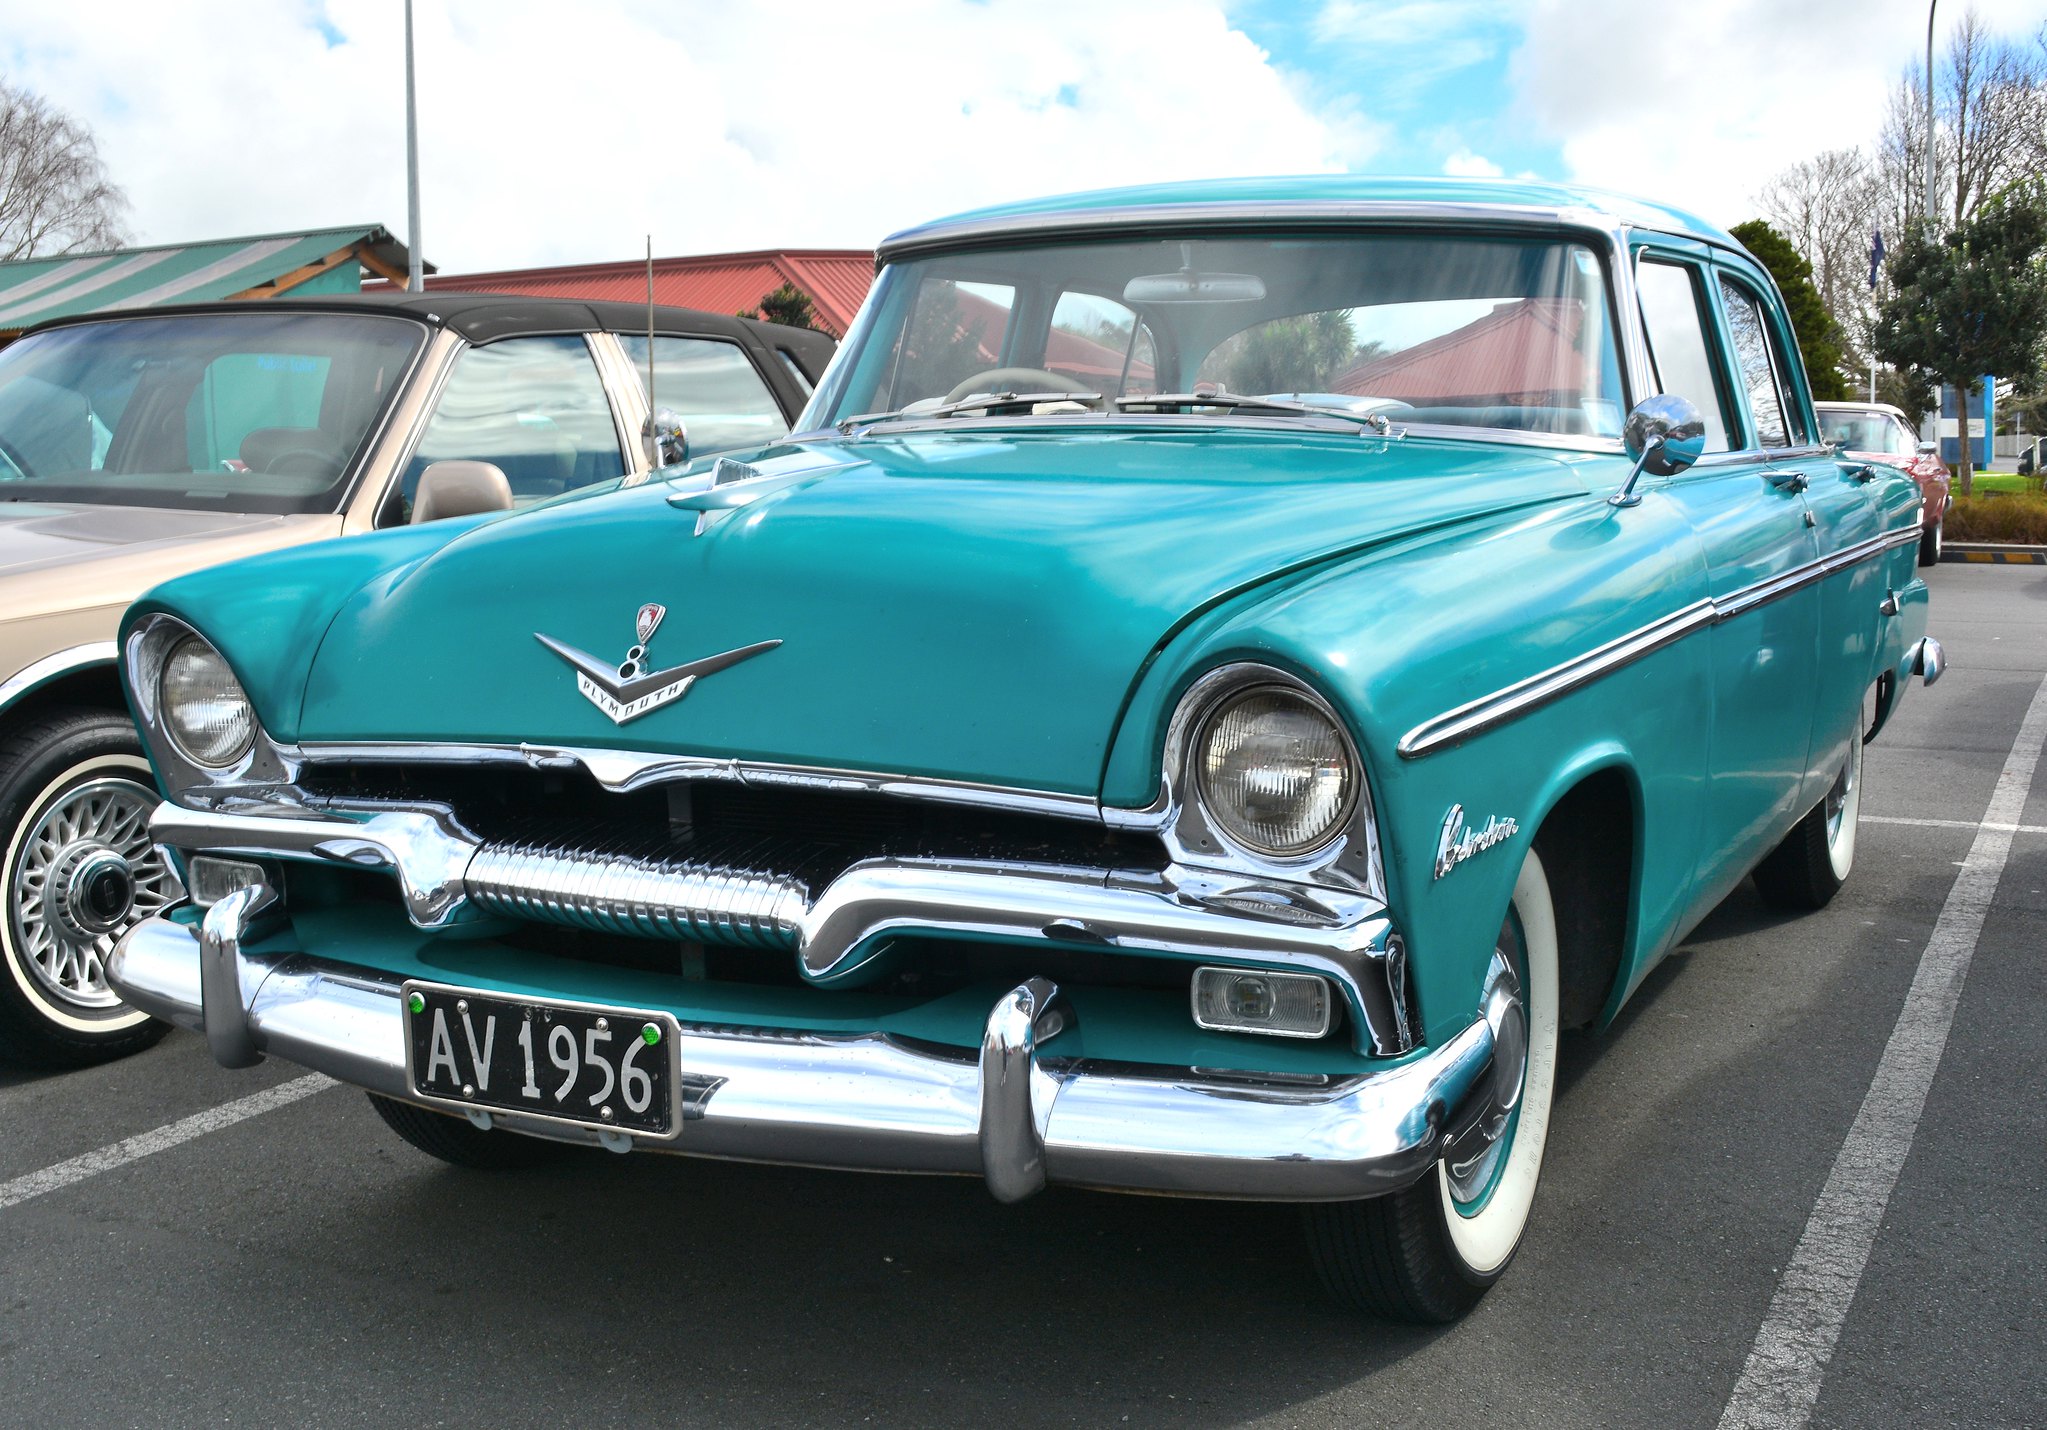 1955 Plymouth Belvedere